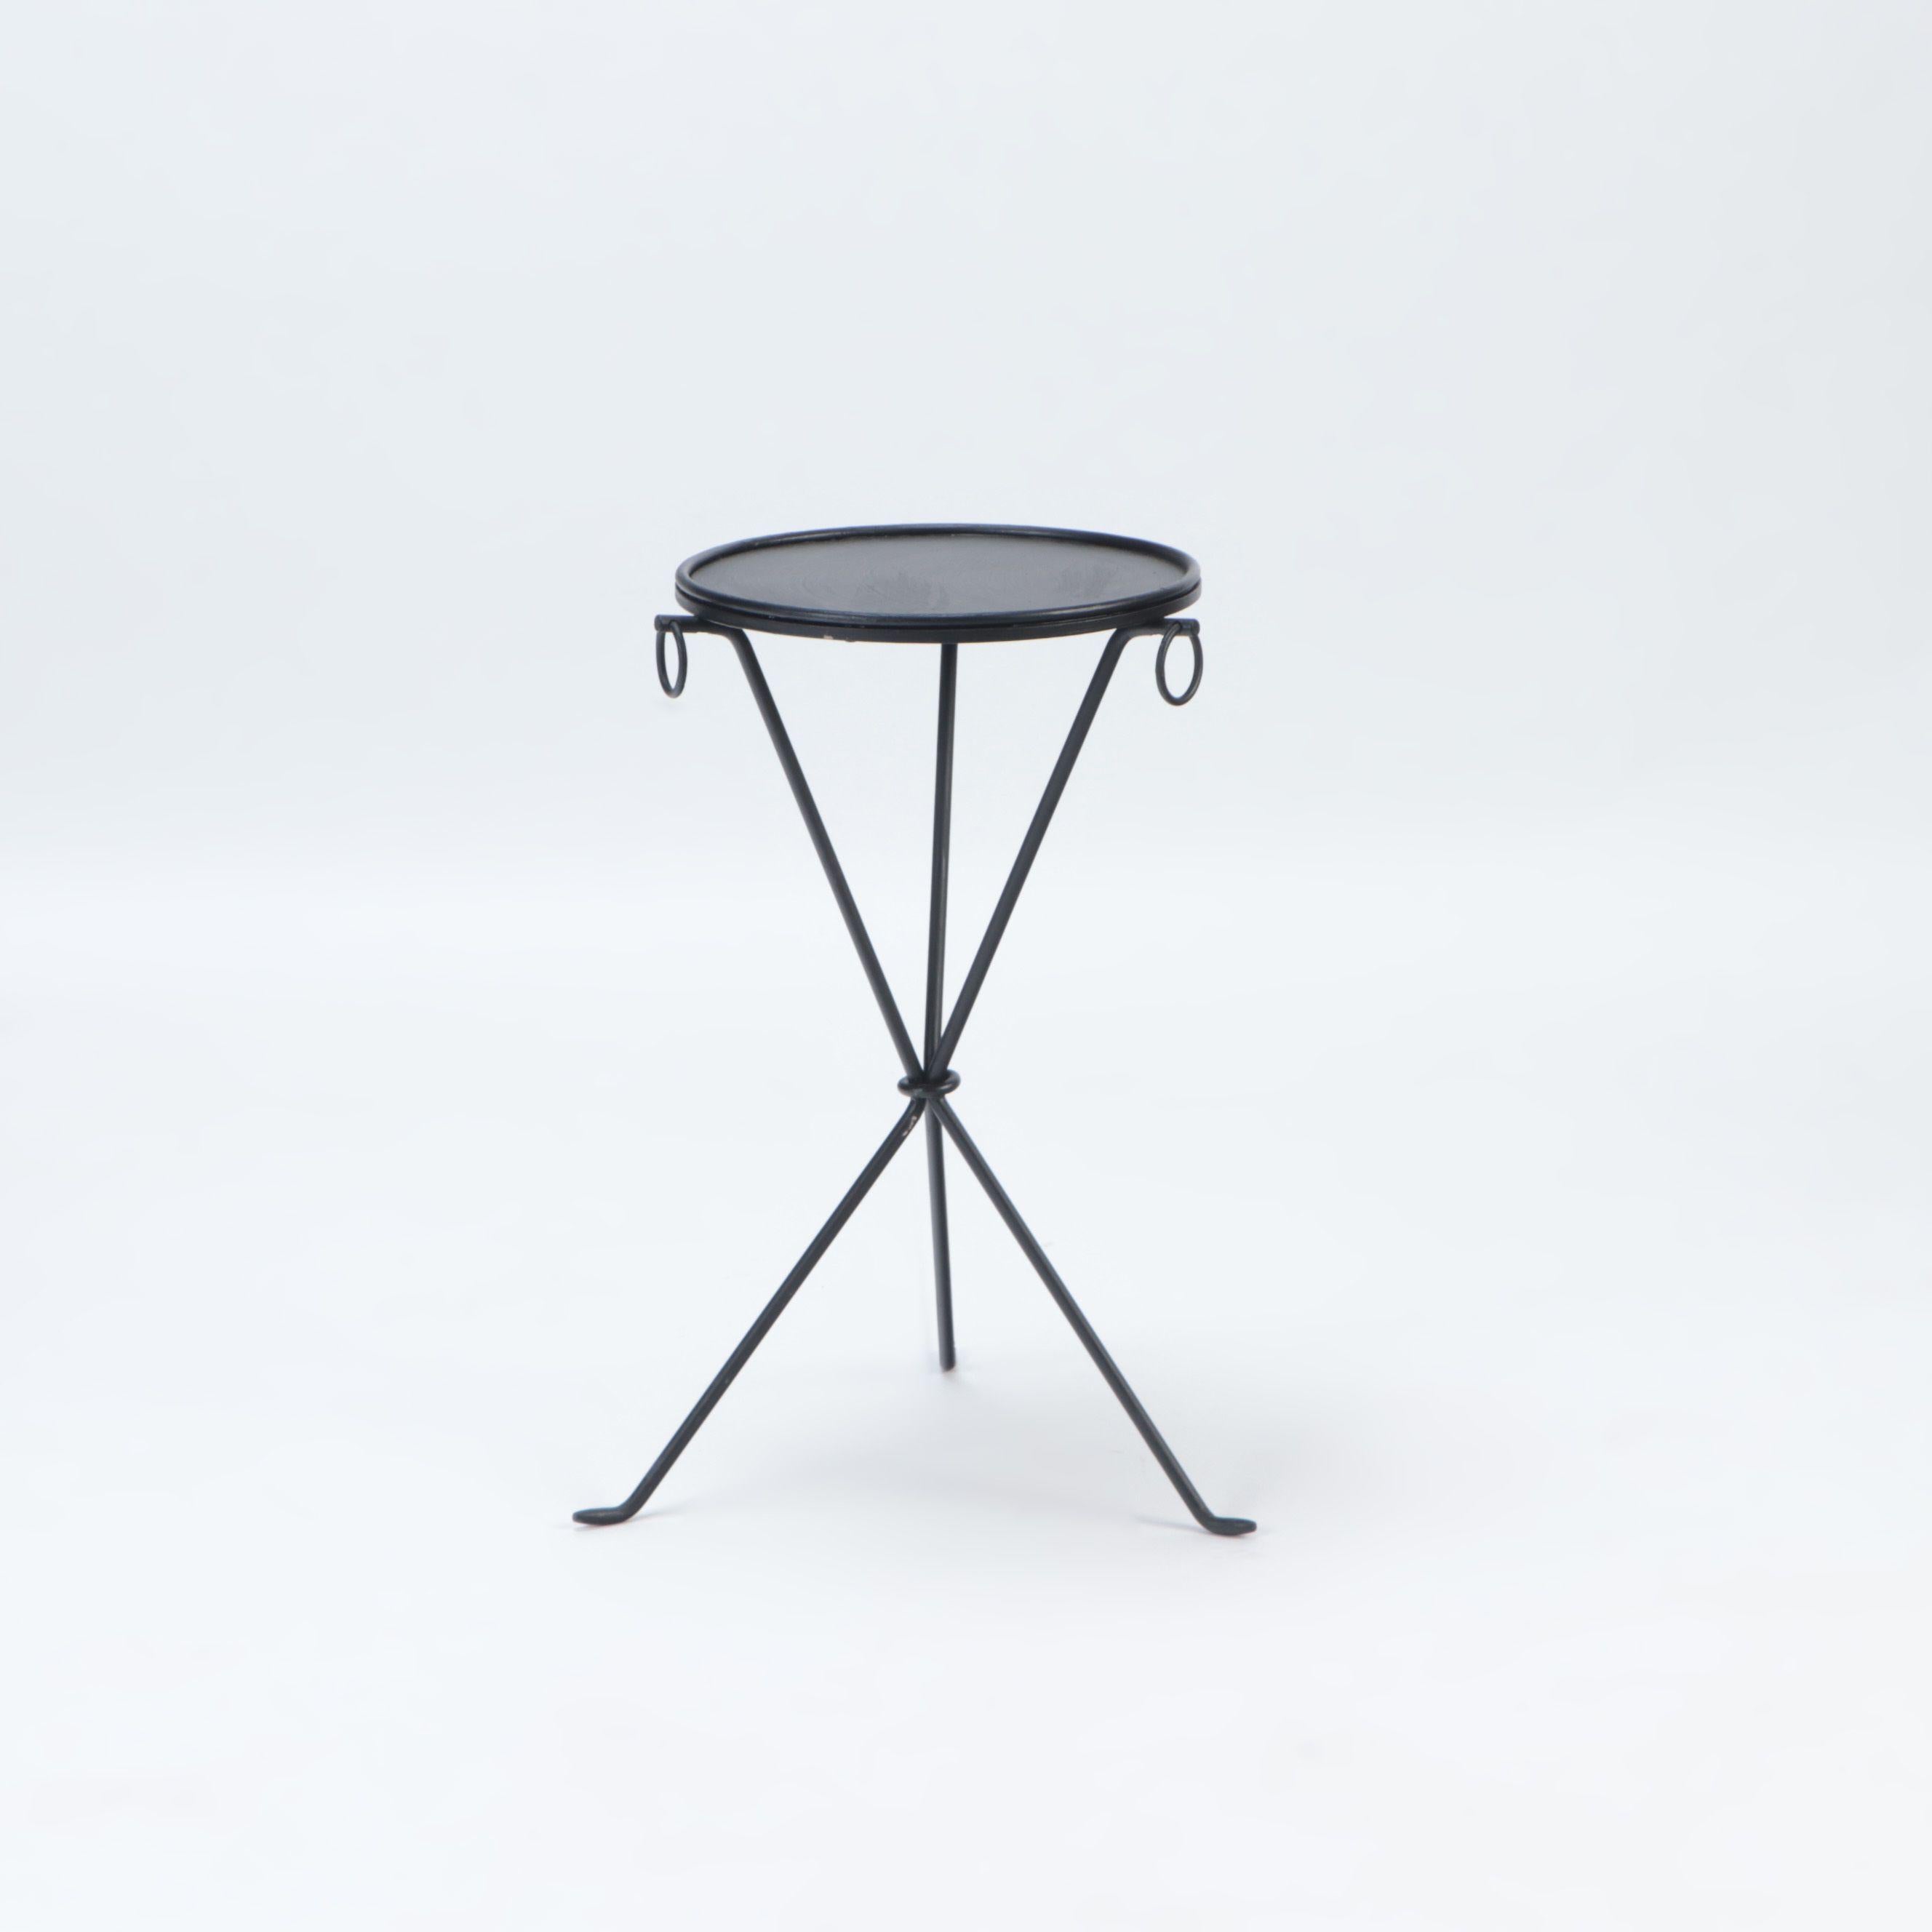 A pair of wrought iron drink tables in the manner of Jean-Michel Frank. The tables rest on a sleek tripod form base.